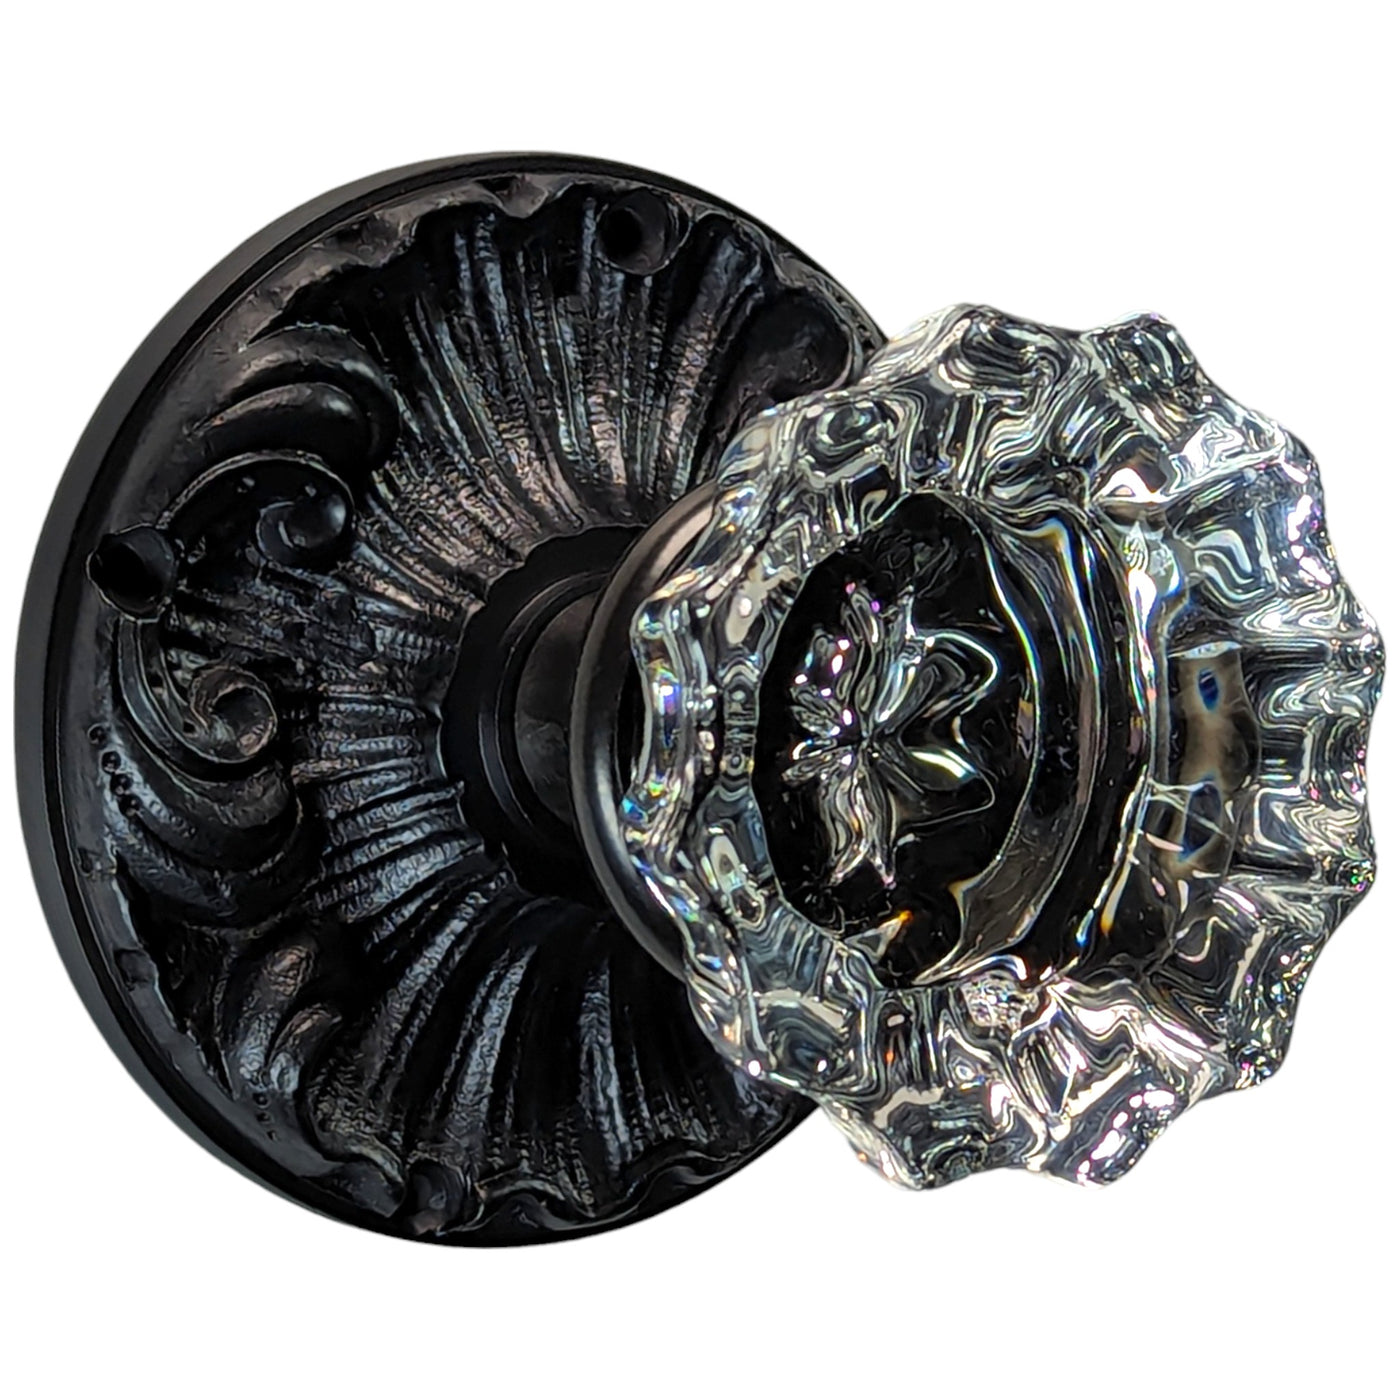 Romanesque Rosette Door Set with Fluted Crystal Door Knobs (Several Finishes Available)